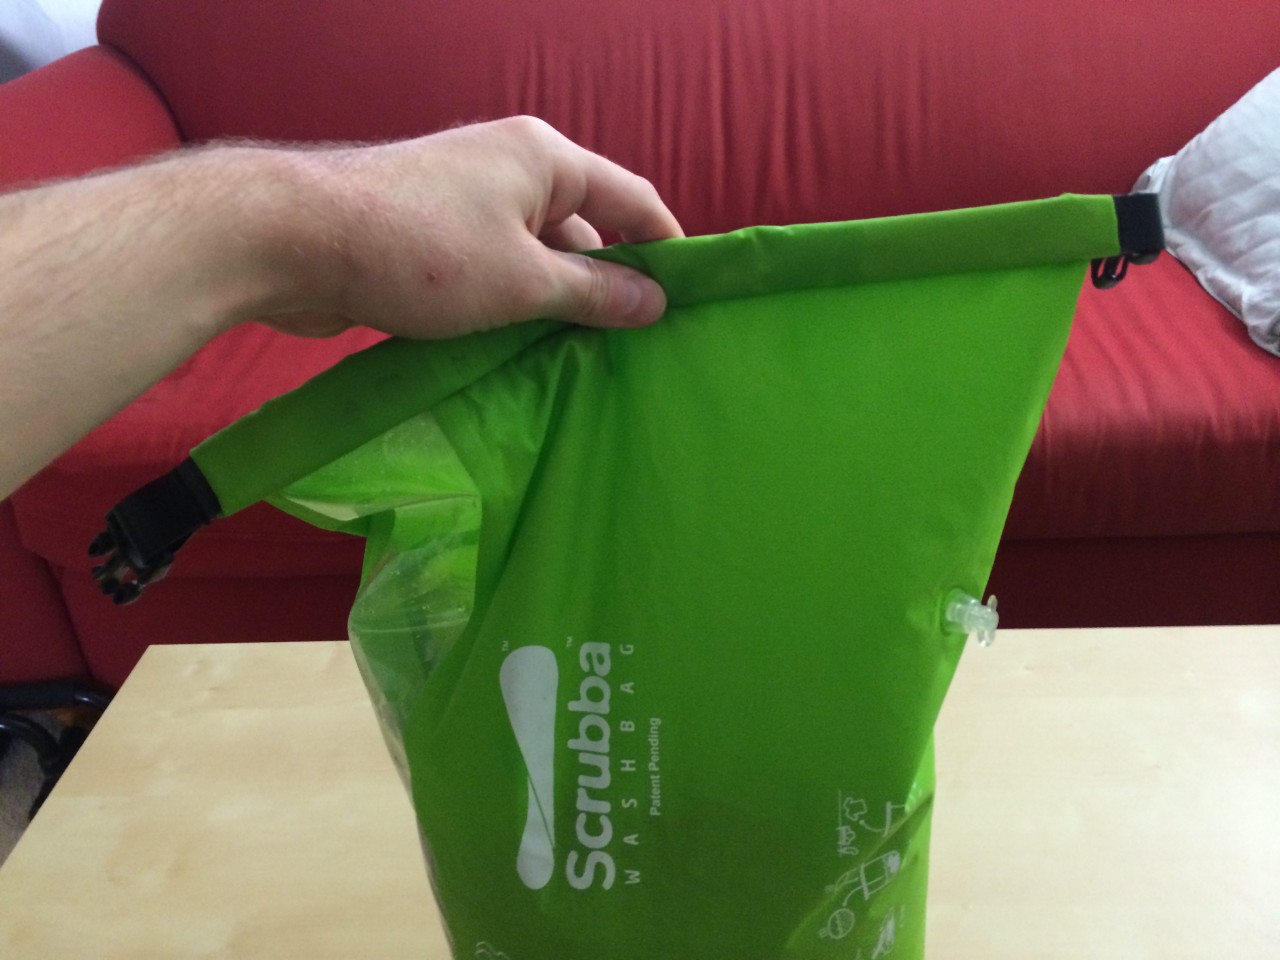 I Tried the Scrubba Bag — Here's My Verdict